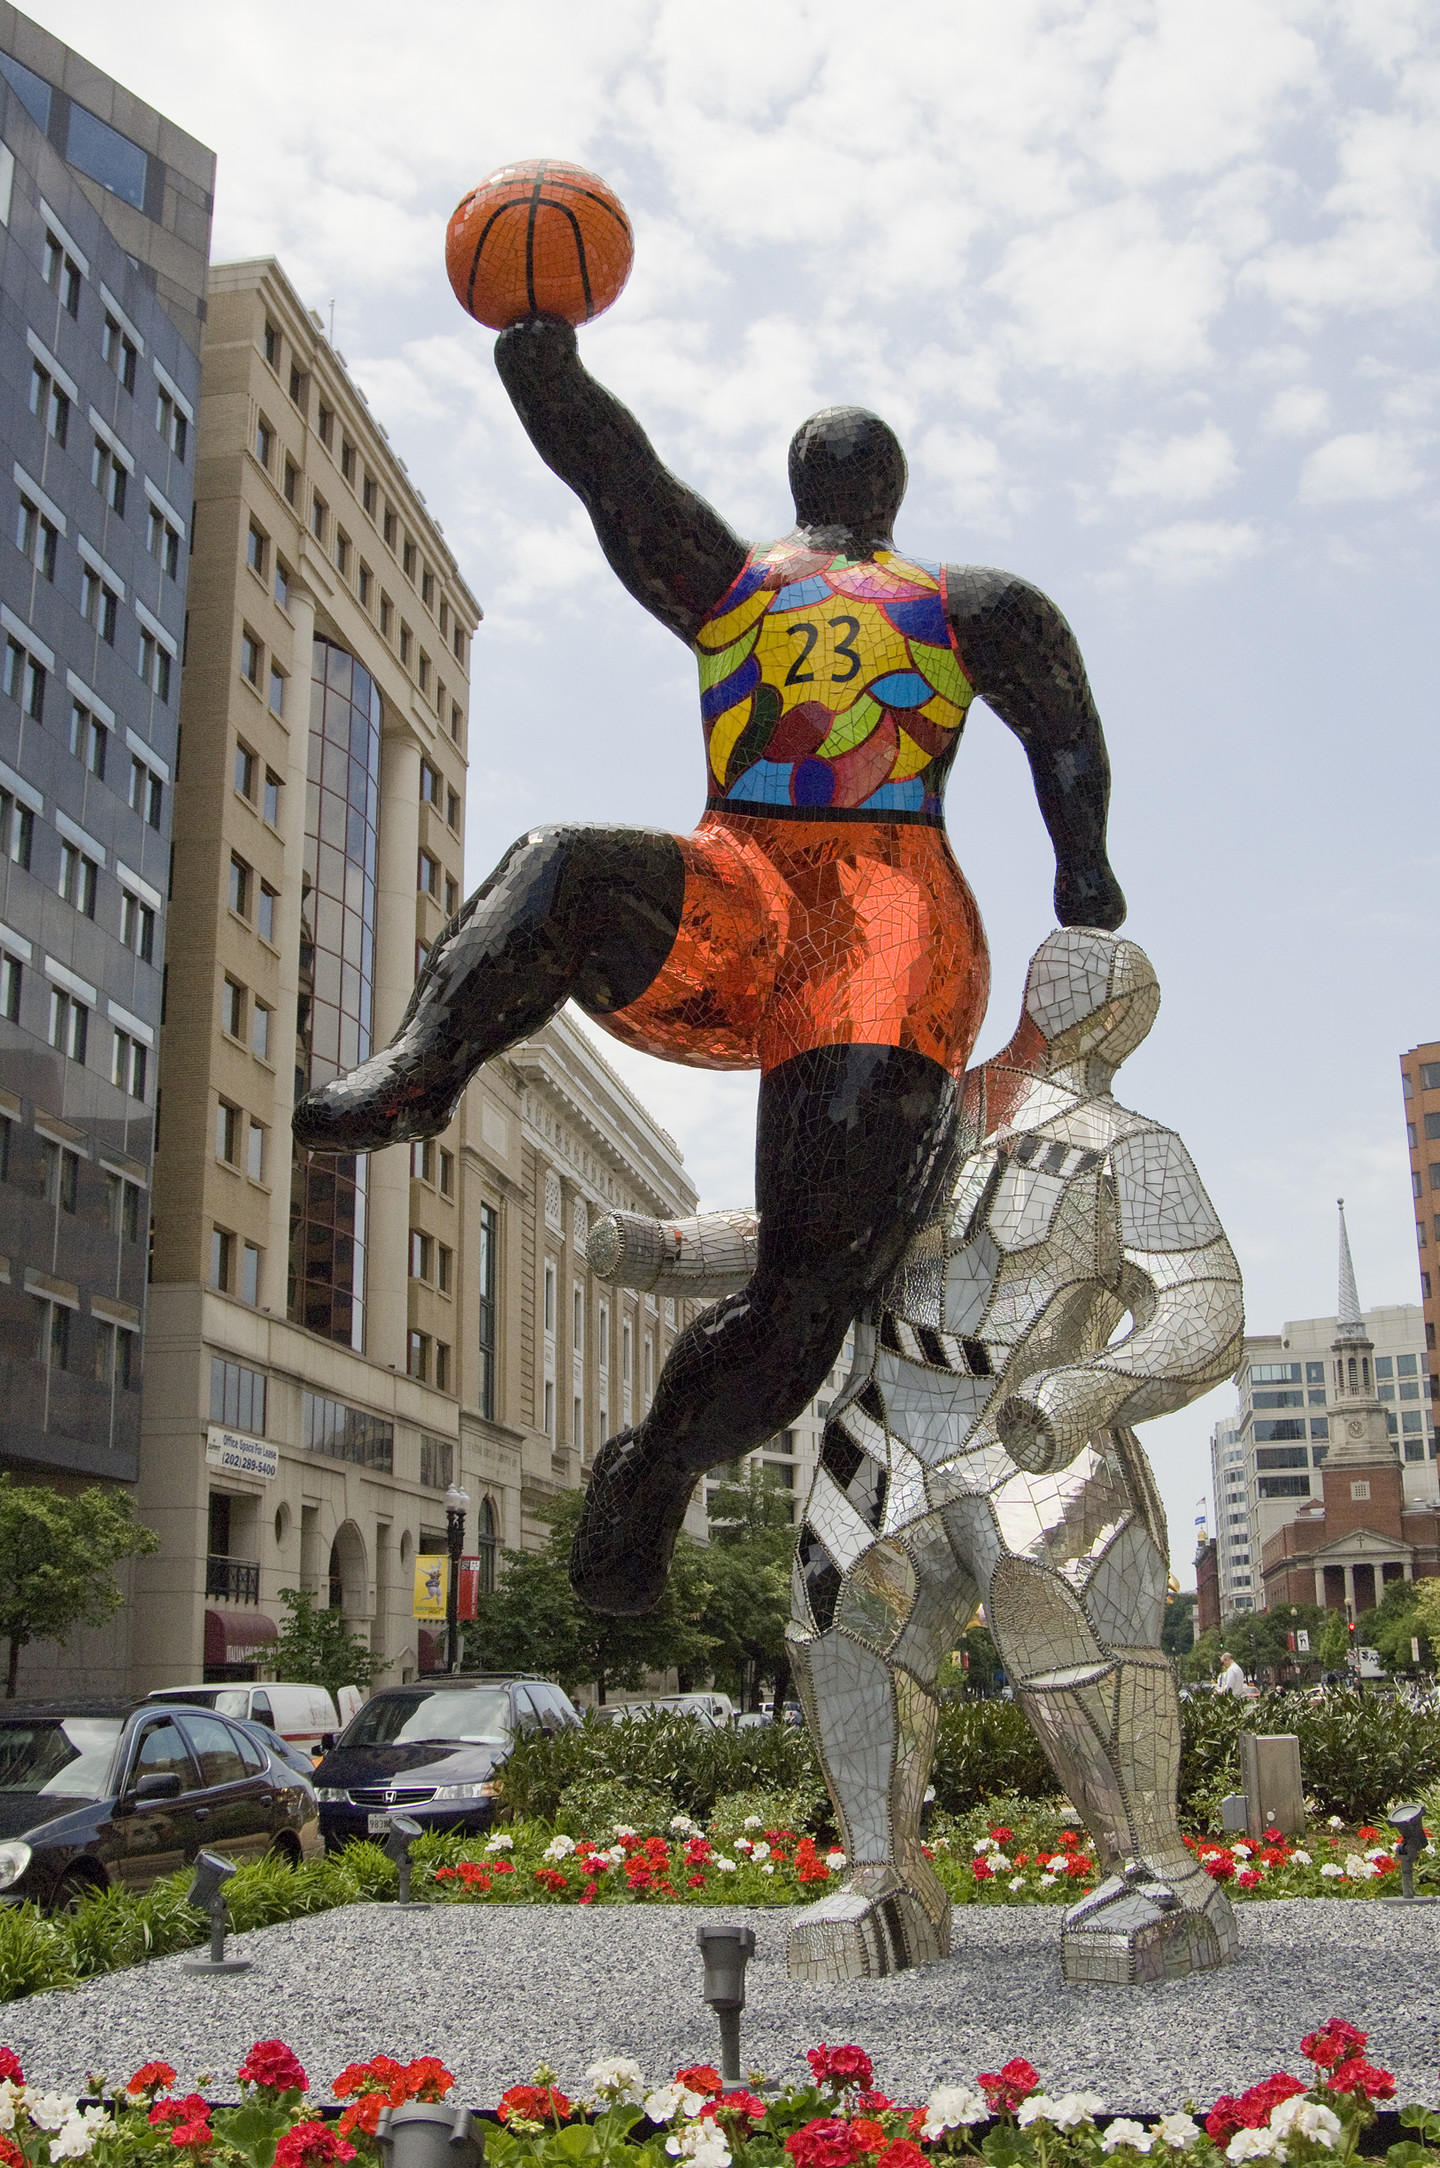 Two large figures, one black and one in silver, are playing basketball next to a street. The figure with the black skin is jumping up with the basketball, leaning their hand onto the head of the figure in silver. The figure jumping is wearing a colorful outfit made from a reflecting material.